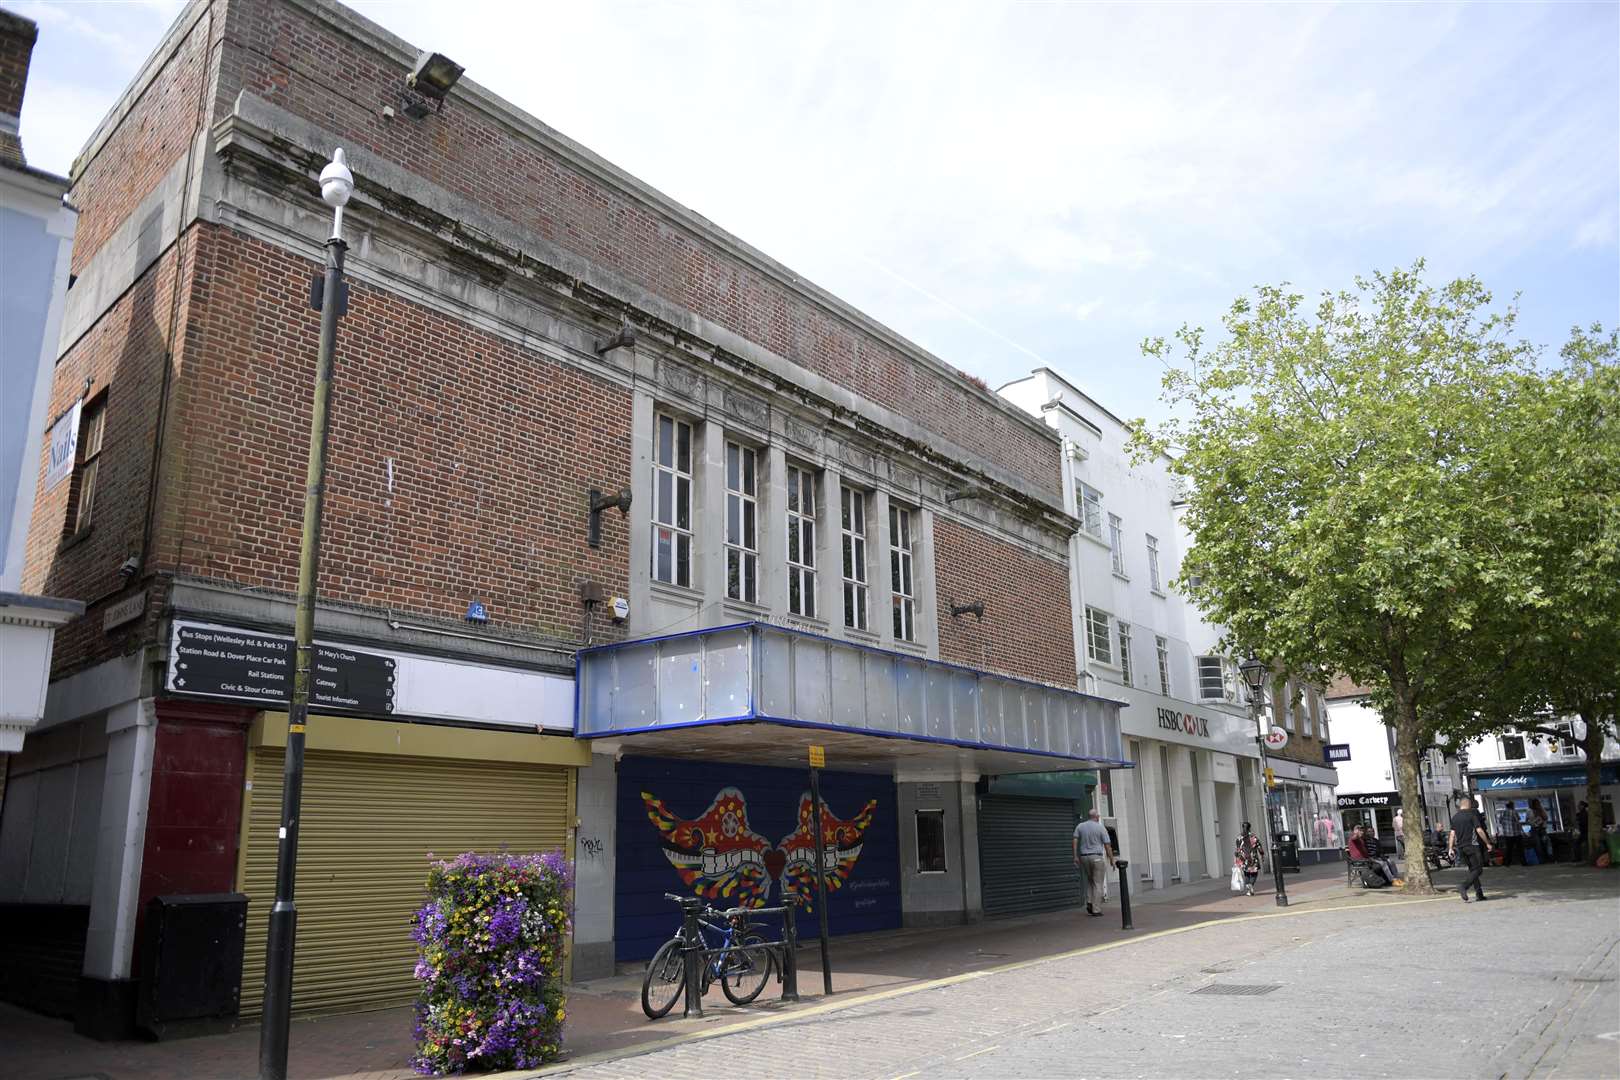 The Mecca Bingo building has been at the centre of debate for months